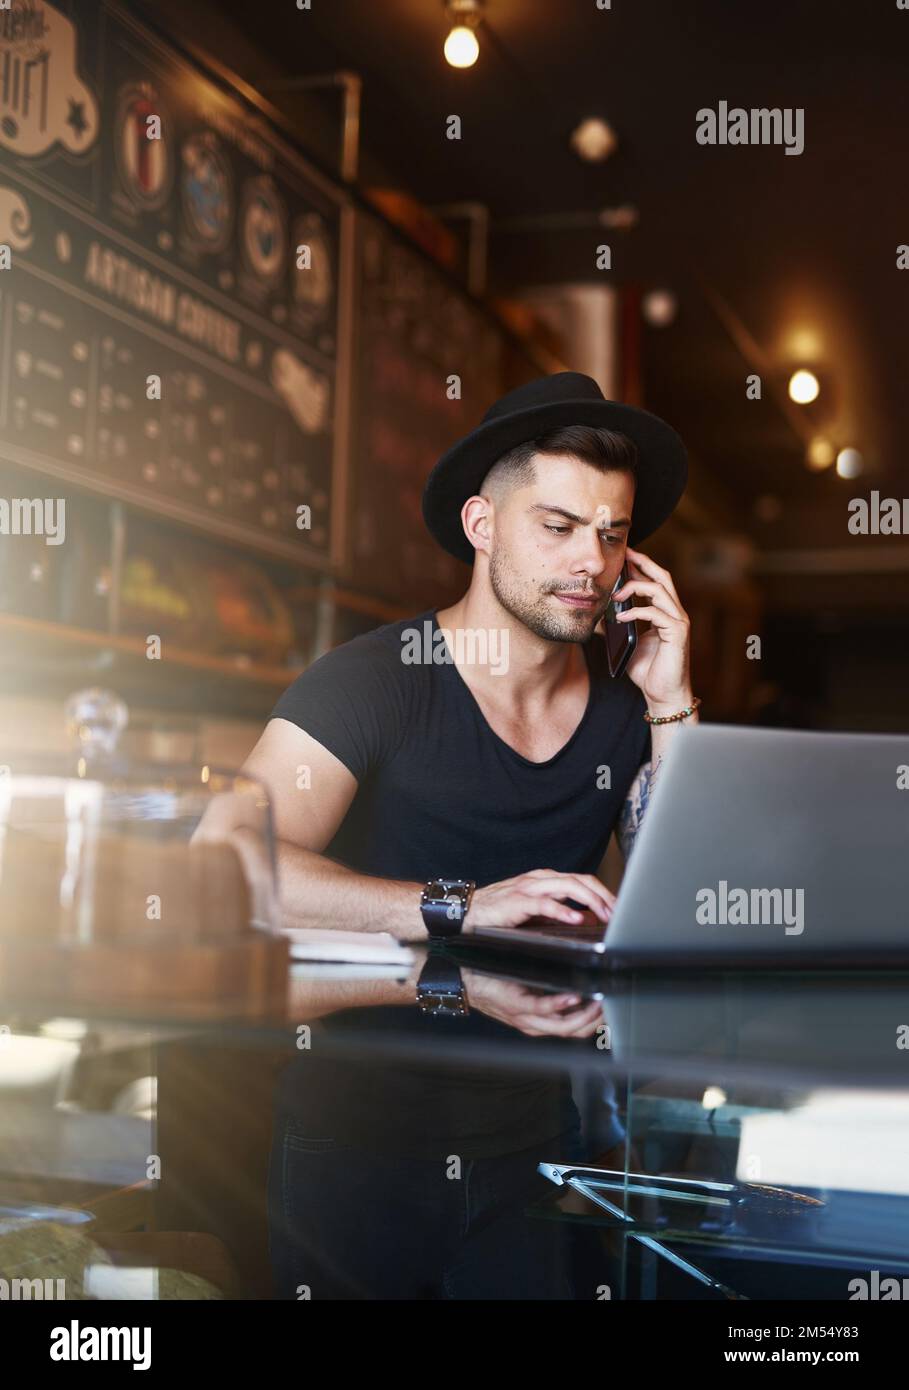 The hard work responsible for his cafes success. a young man using a phone and laptop while working in a coffee shop. Stock Photo